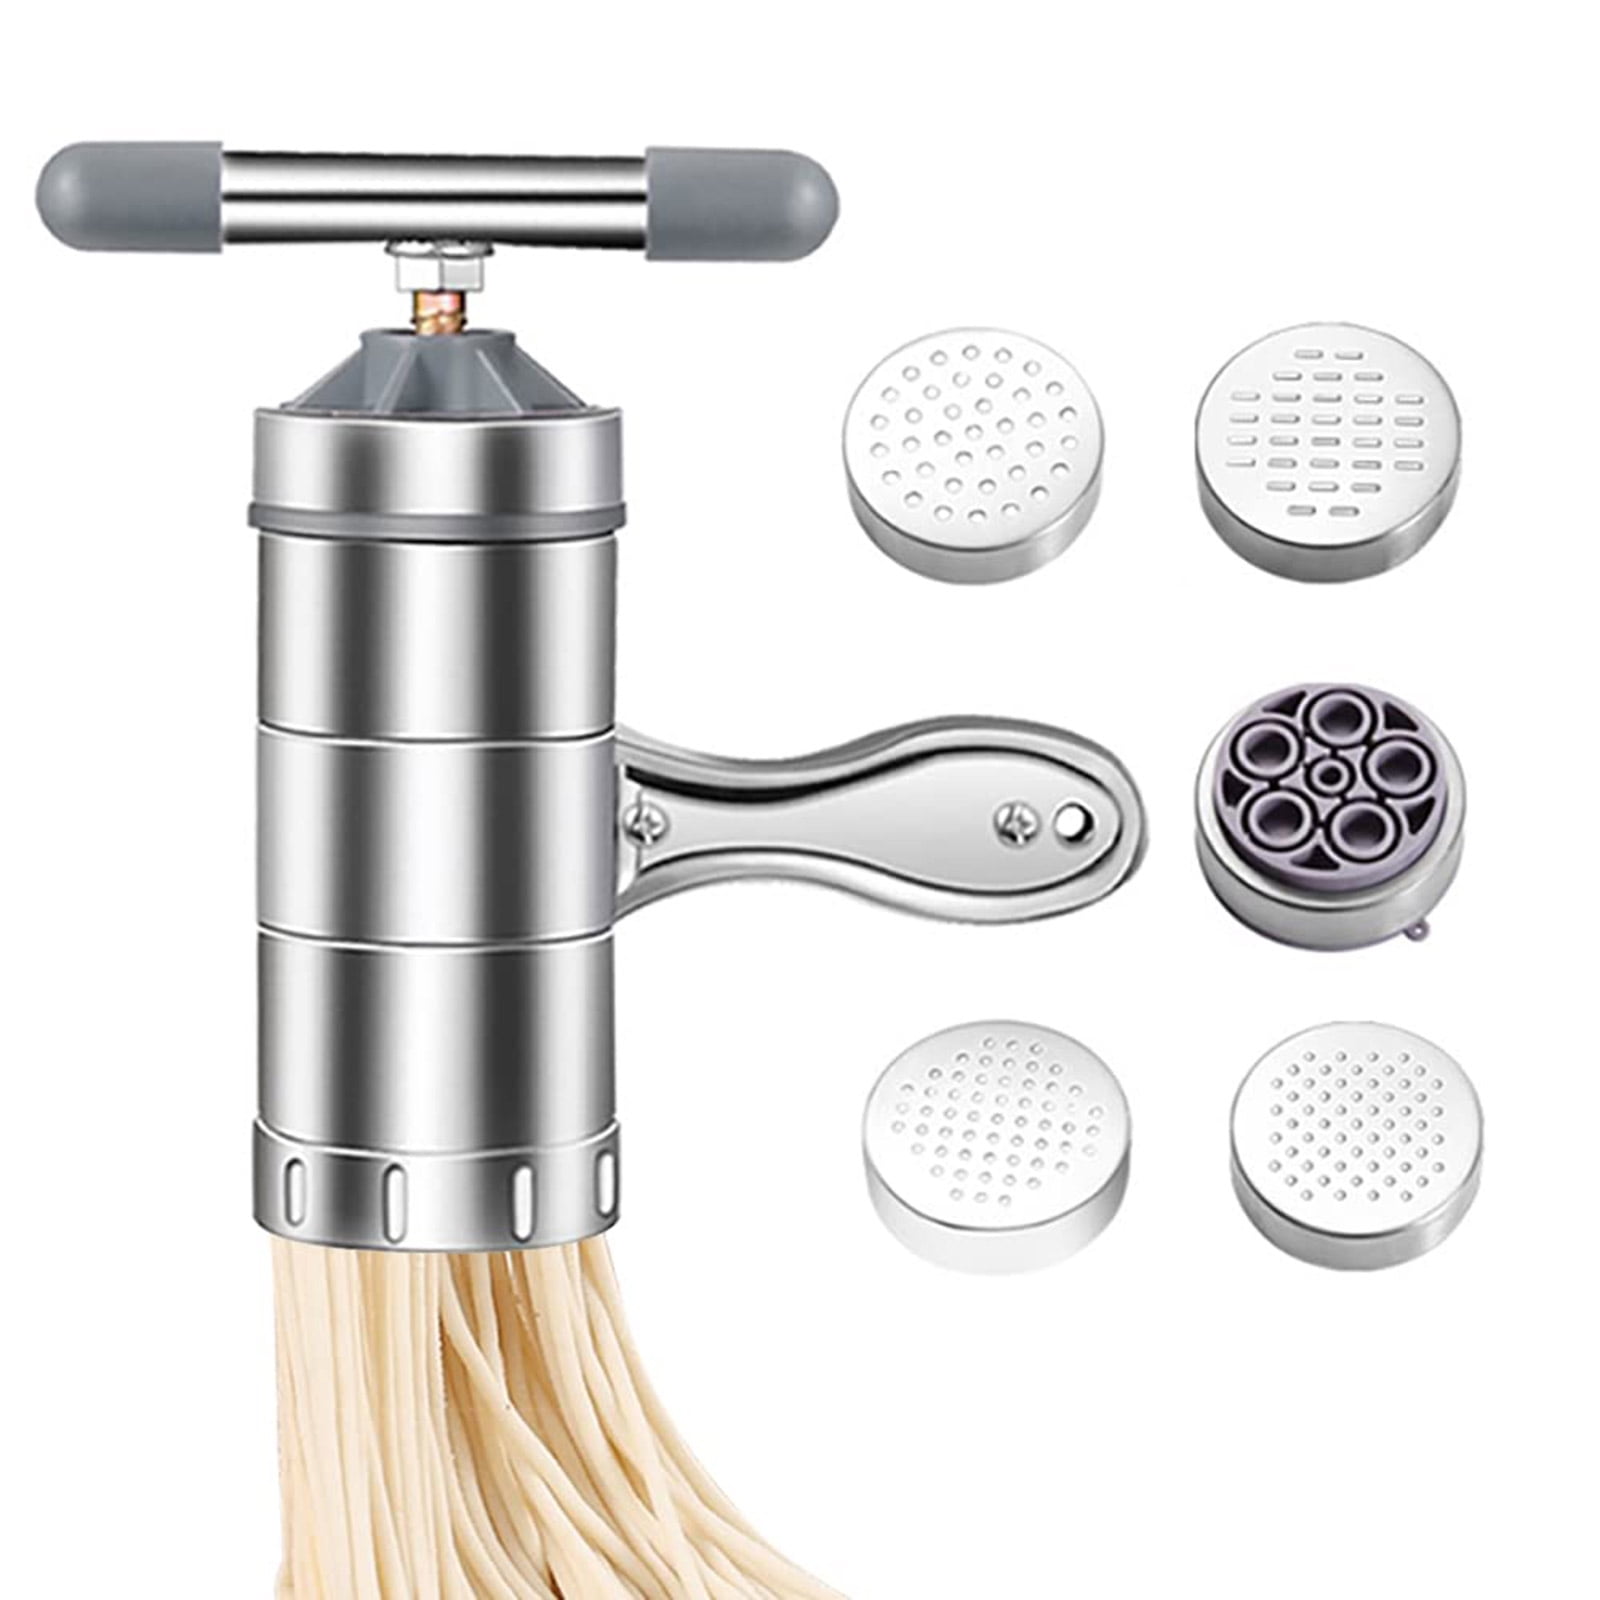 household manual stand noodle press make